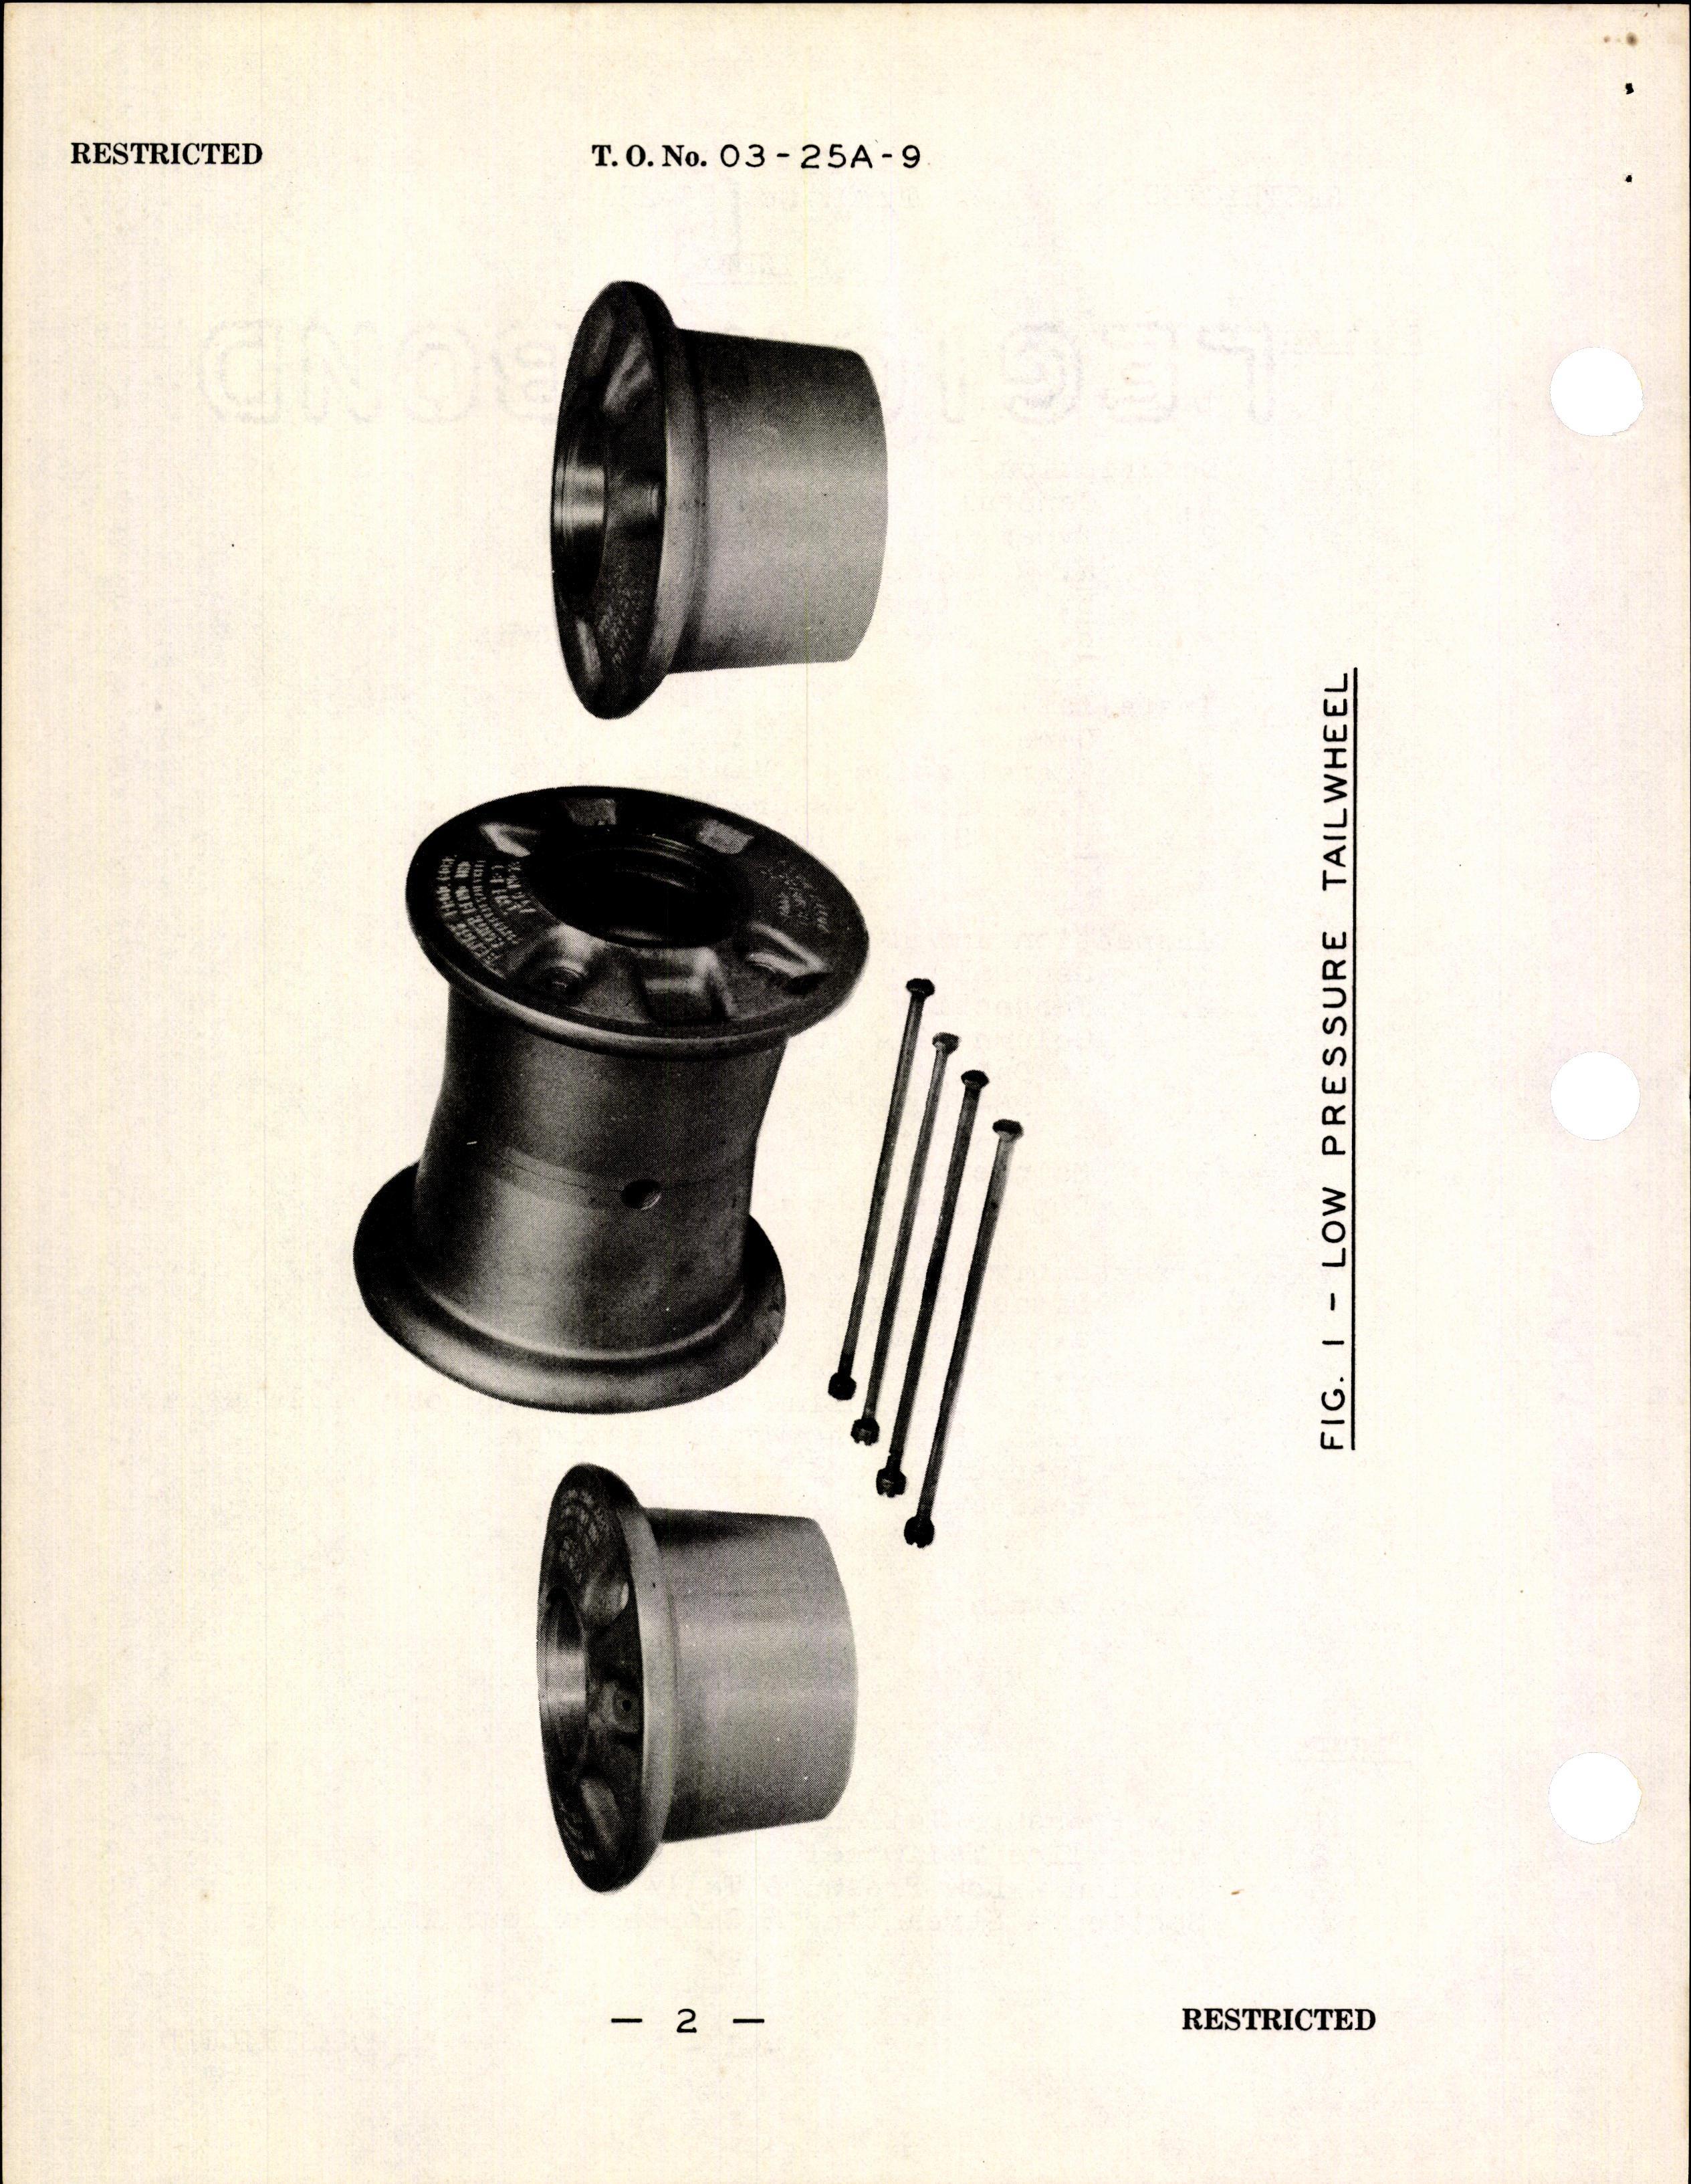 Sample page 4 from AirCorps Library document: Handbook of Instructions with Parts Catalog for Tailwheels